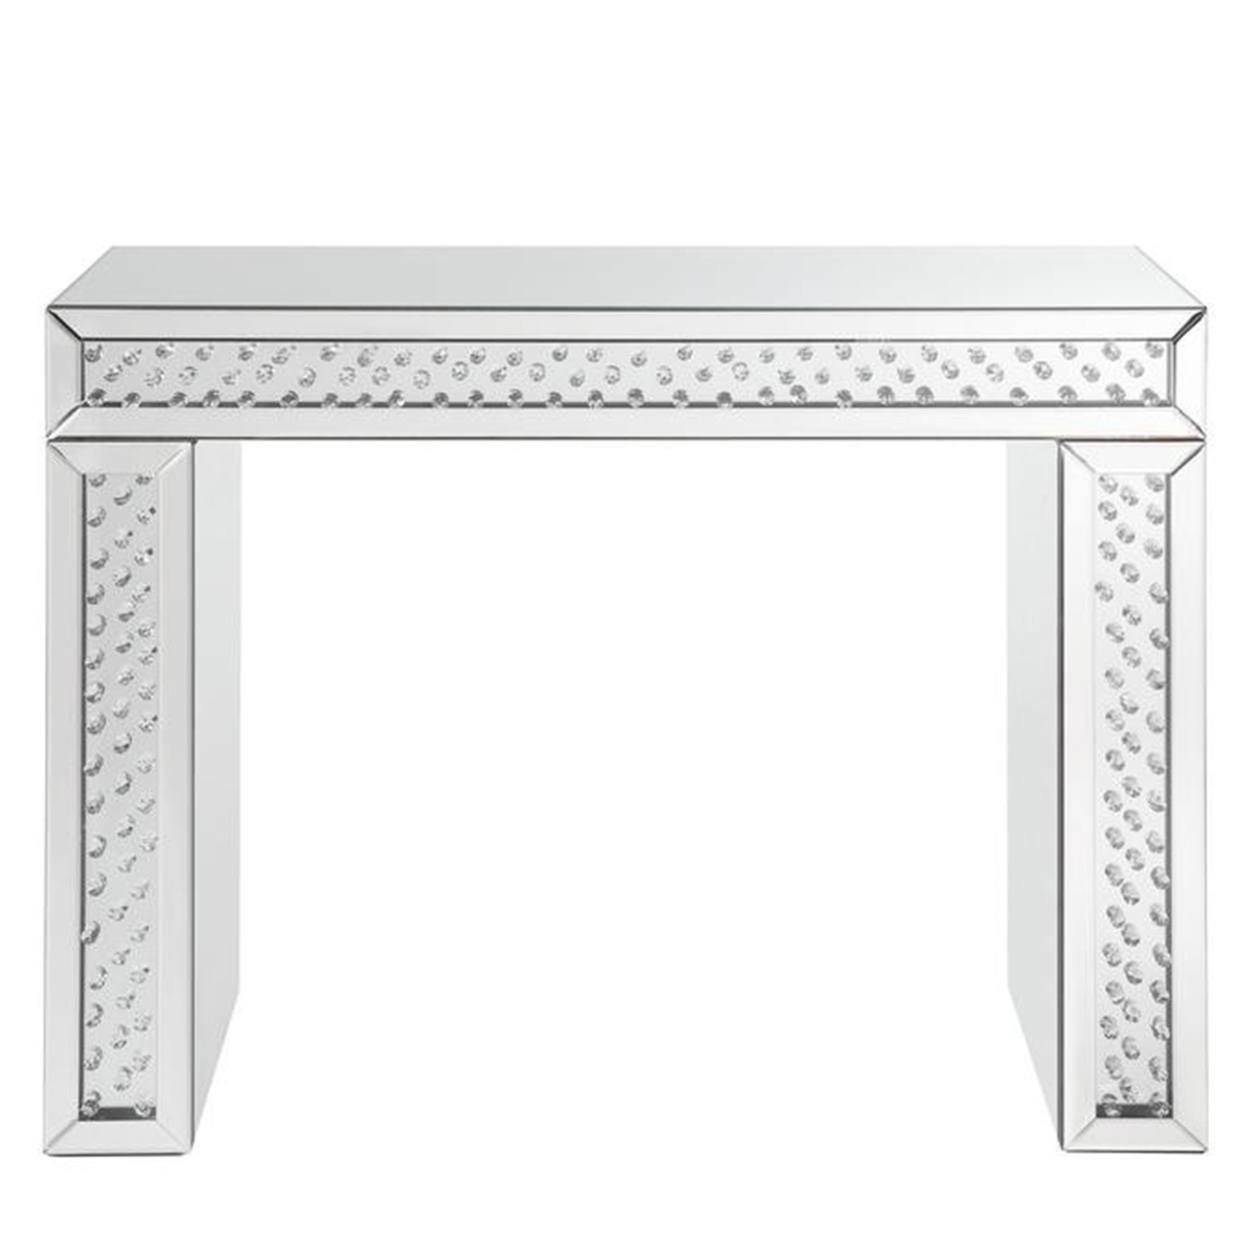 Mirror Accented Wood And Glass Vanity Desk With Faux Crystal Inlay, Silver- Saltoro Sherpi